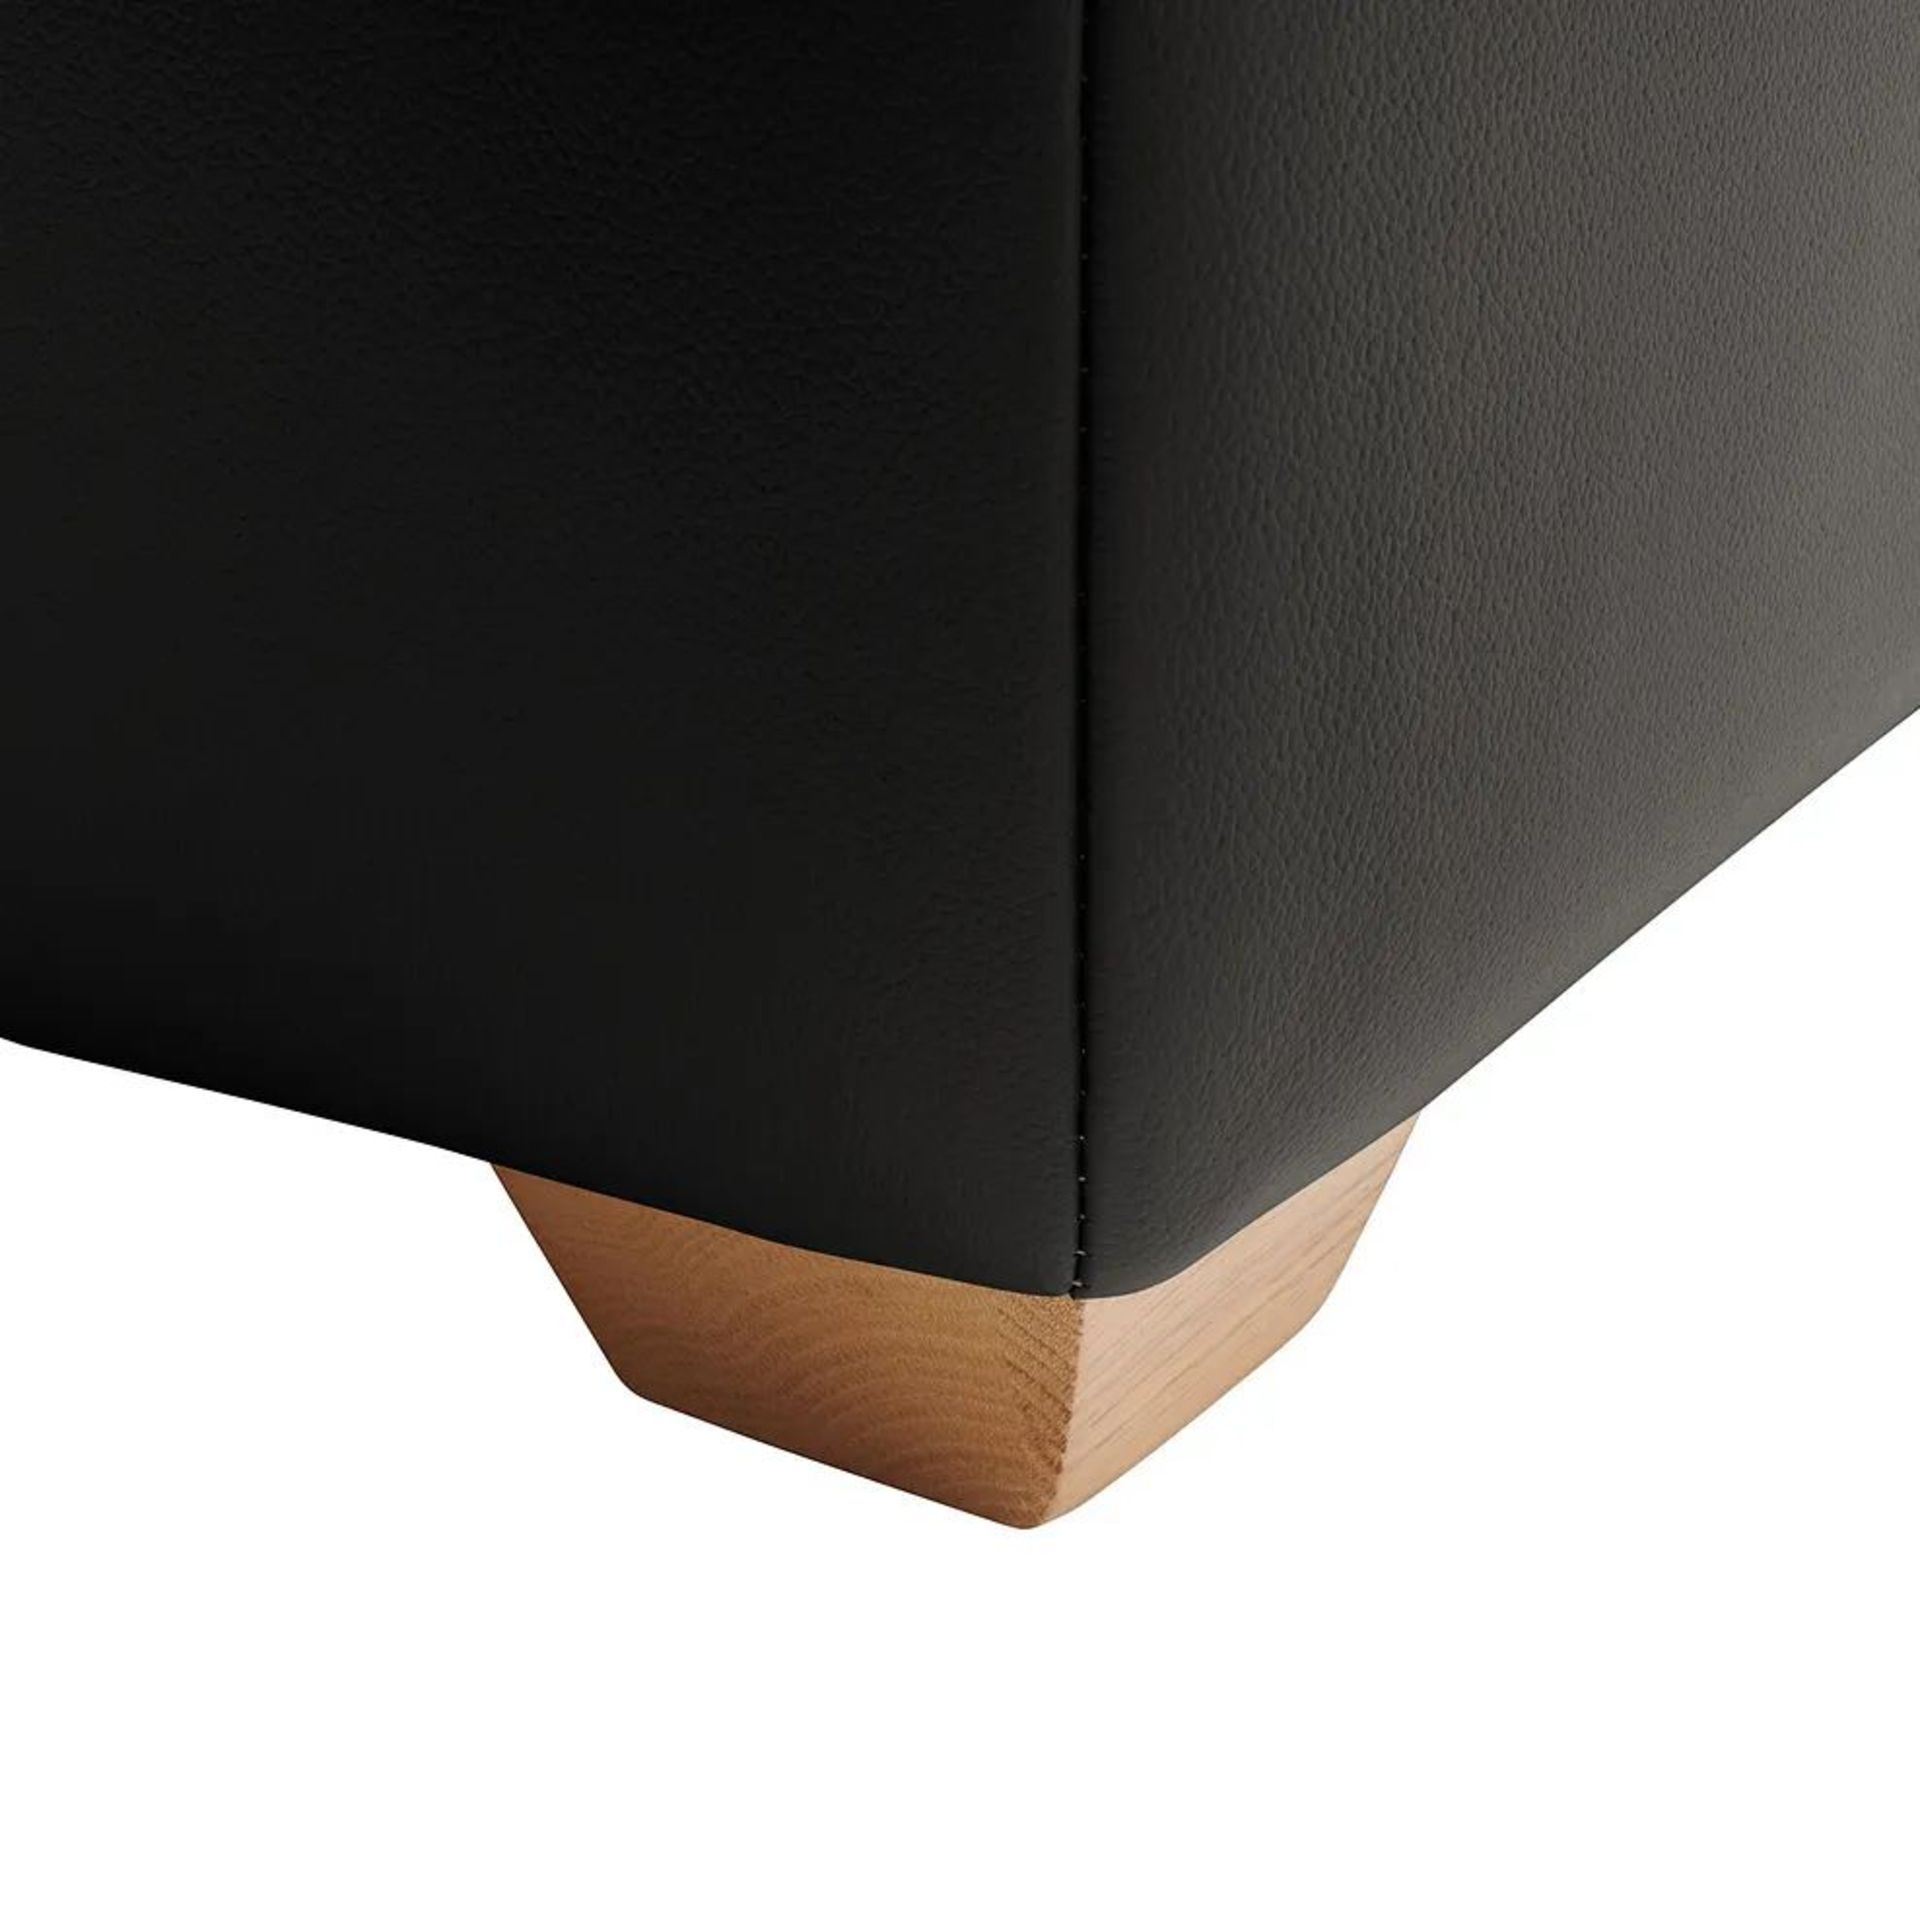 BRAND NEW SAMSON Storage Footstool - BLACK LEATHER. RRP £349. Characterised by a simple cuboid - Image 5 of 7